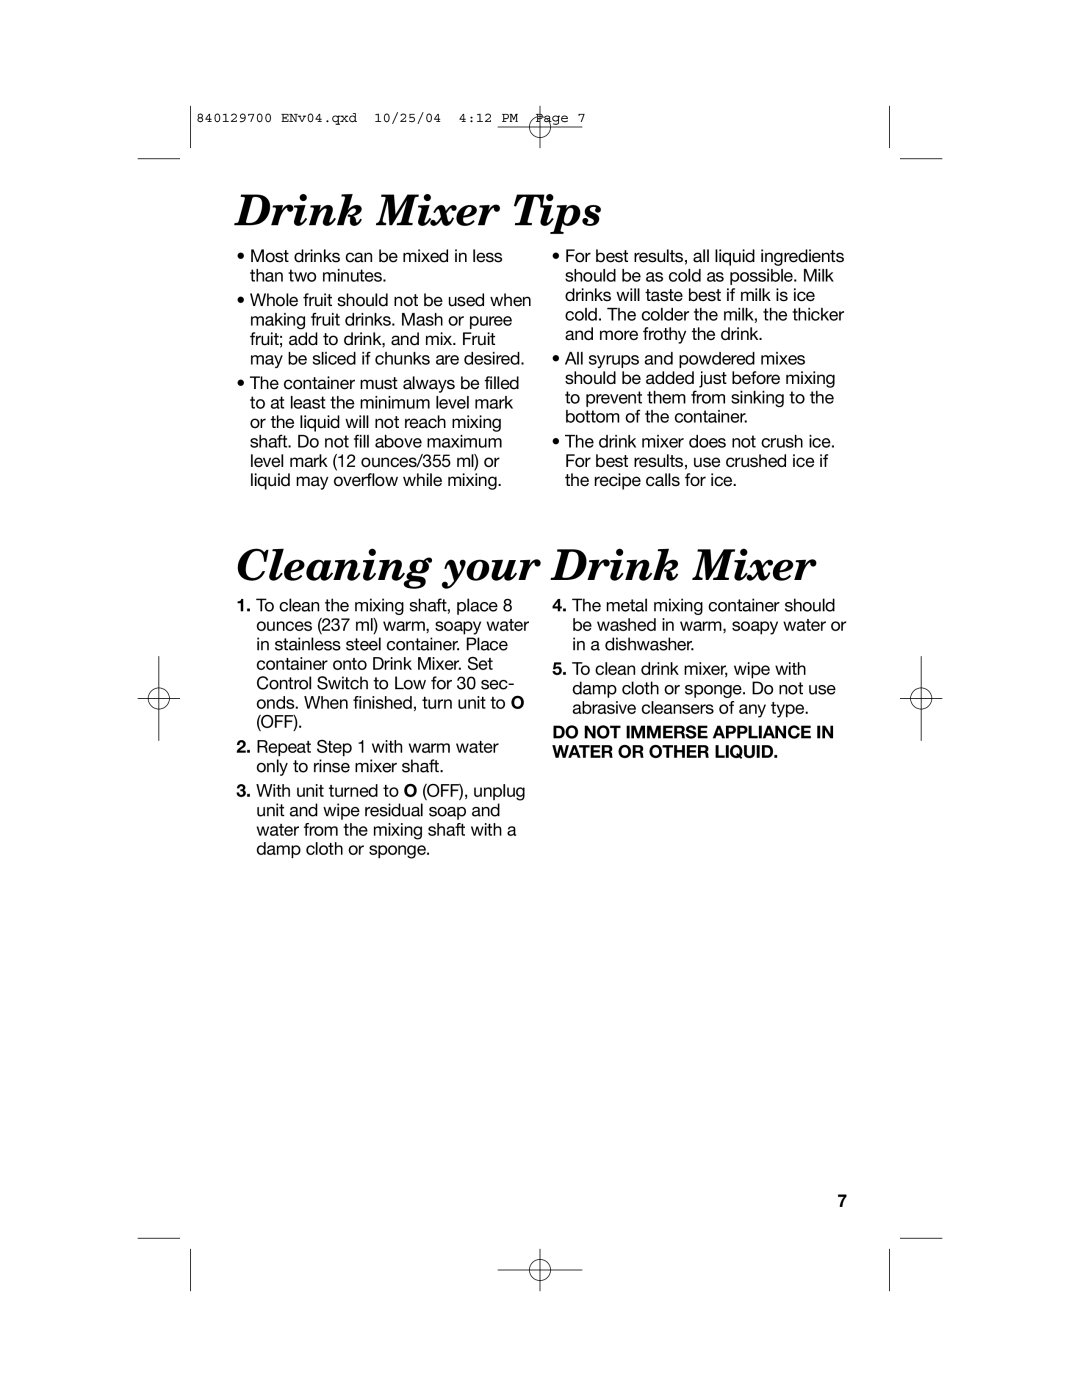 Hamilton Beach manual Drink Mixer Tips, Cleaning your Drink Mixer, Do Not Immerse Appliance In Water Or Other Liquid 